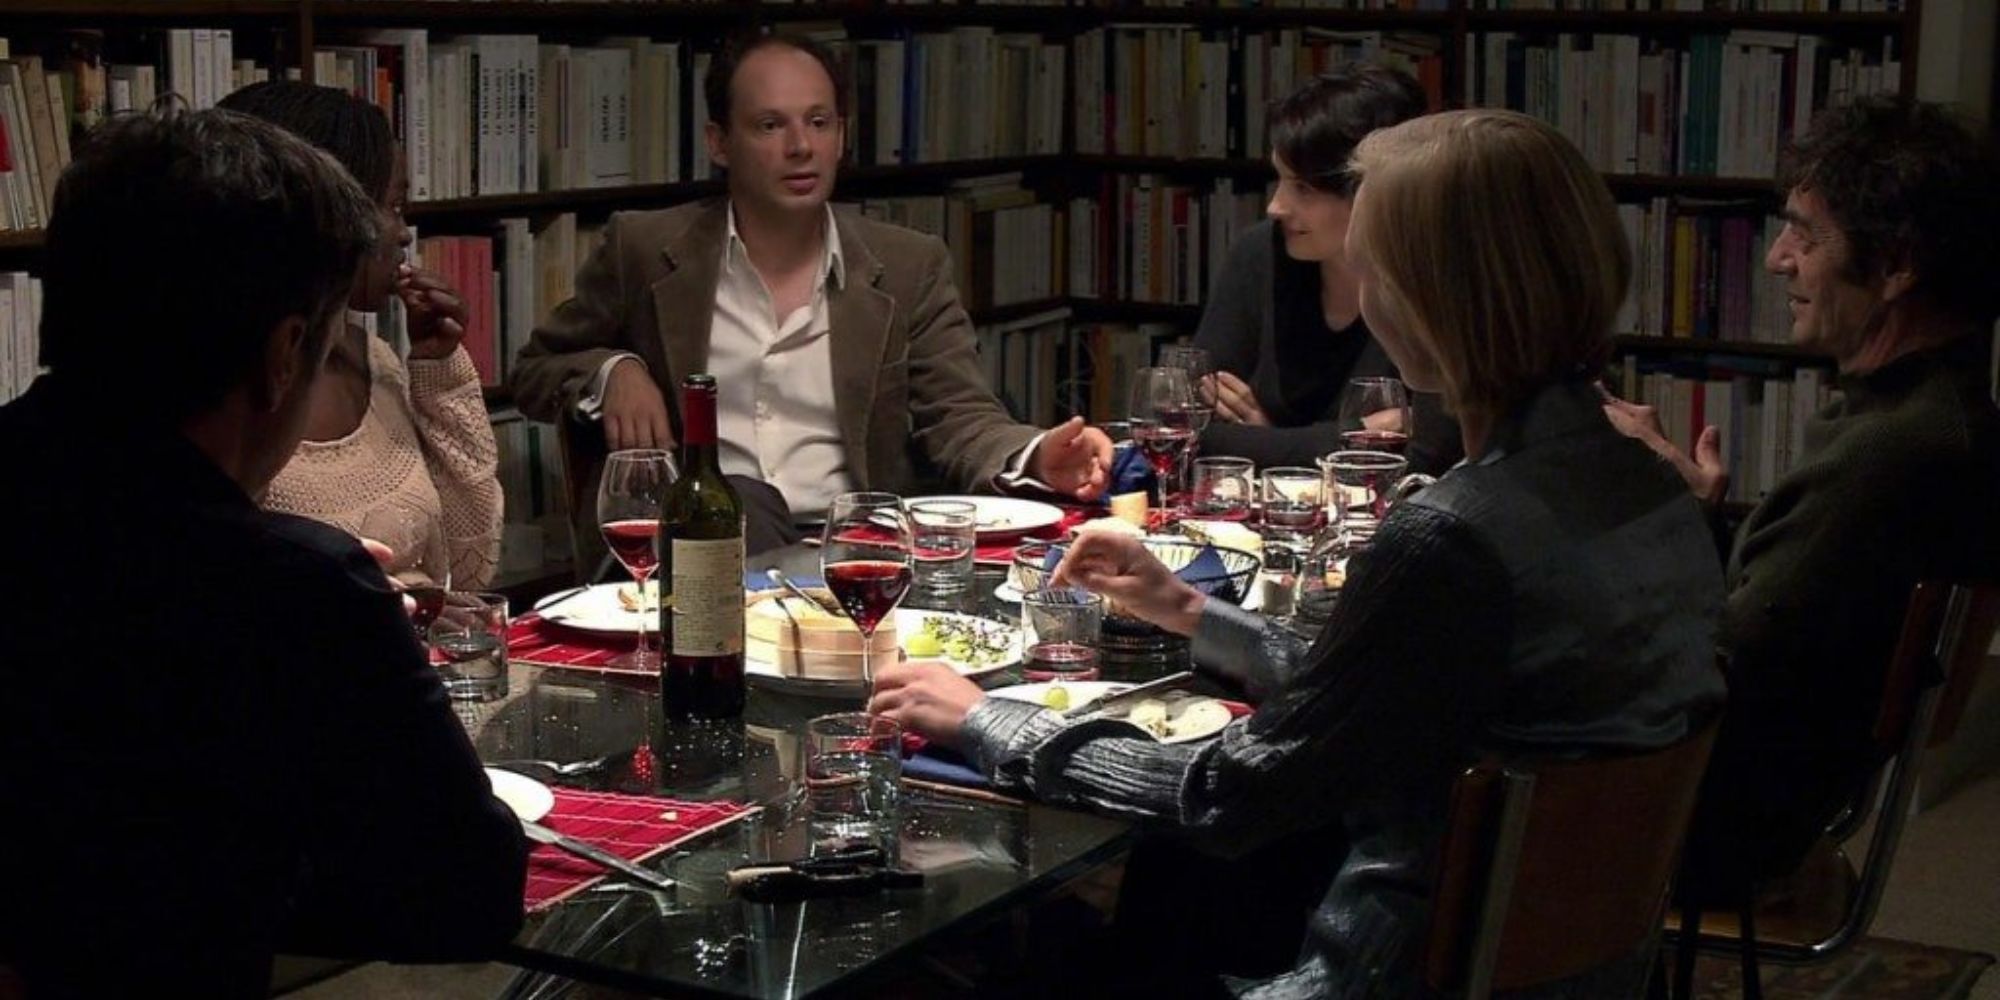 A family sits at a dinner table surrounded by bookshelves